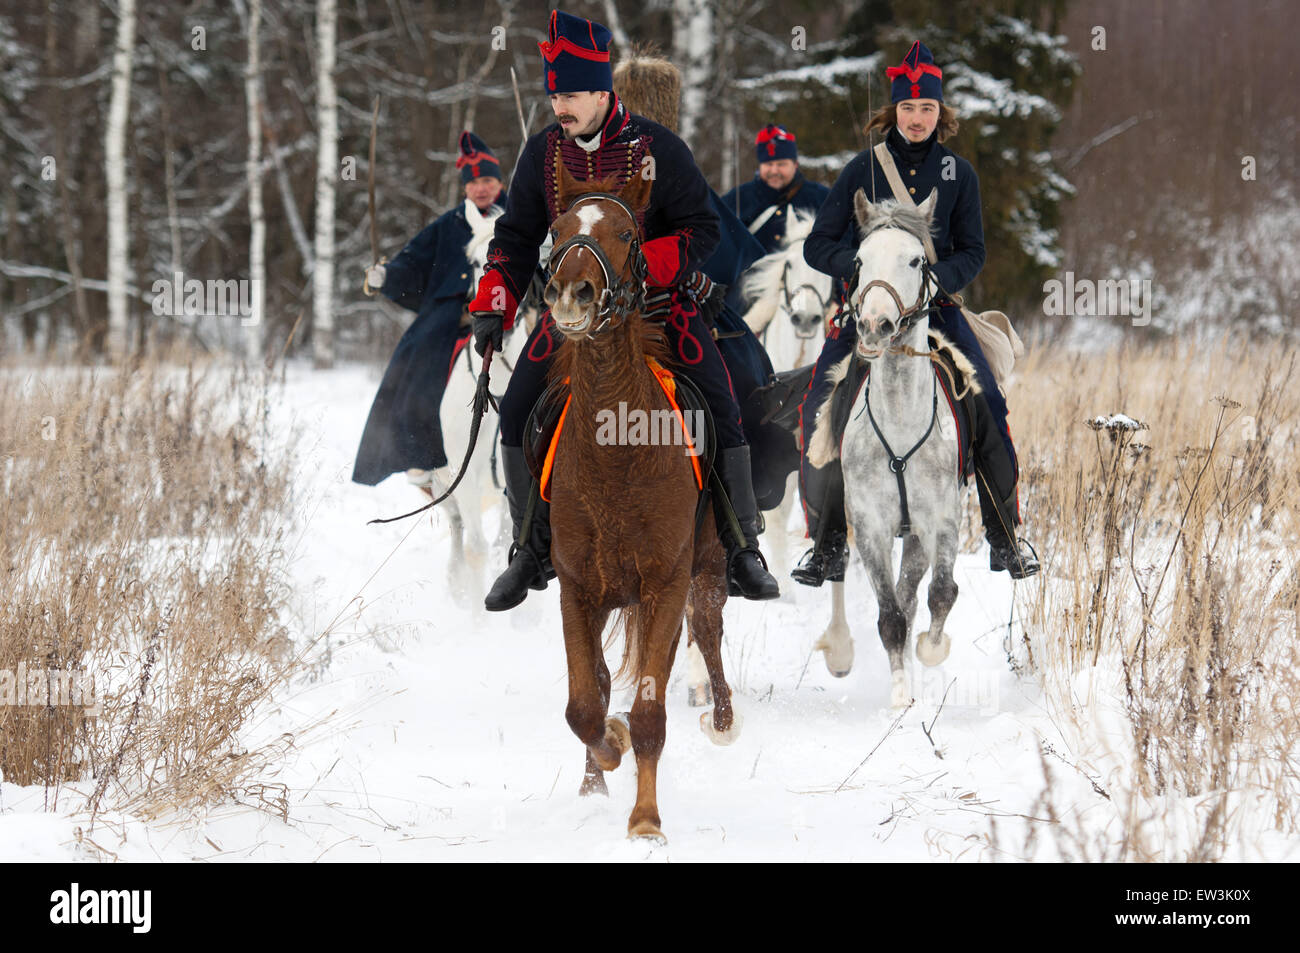 RUSSIA, APRELEVKA - FEBRUARY 7: Unidentified cavalry soldier ride on reenactment of the Napoleonic maneuvers near the Aprelevka city, in 1812. Moscow region, Aprelevka, 7 February, 2015, Russia Stock Photo